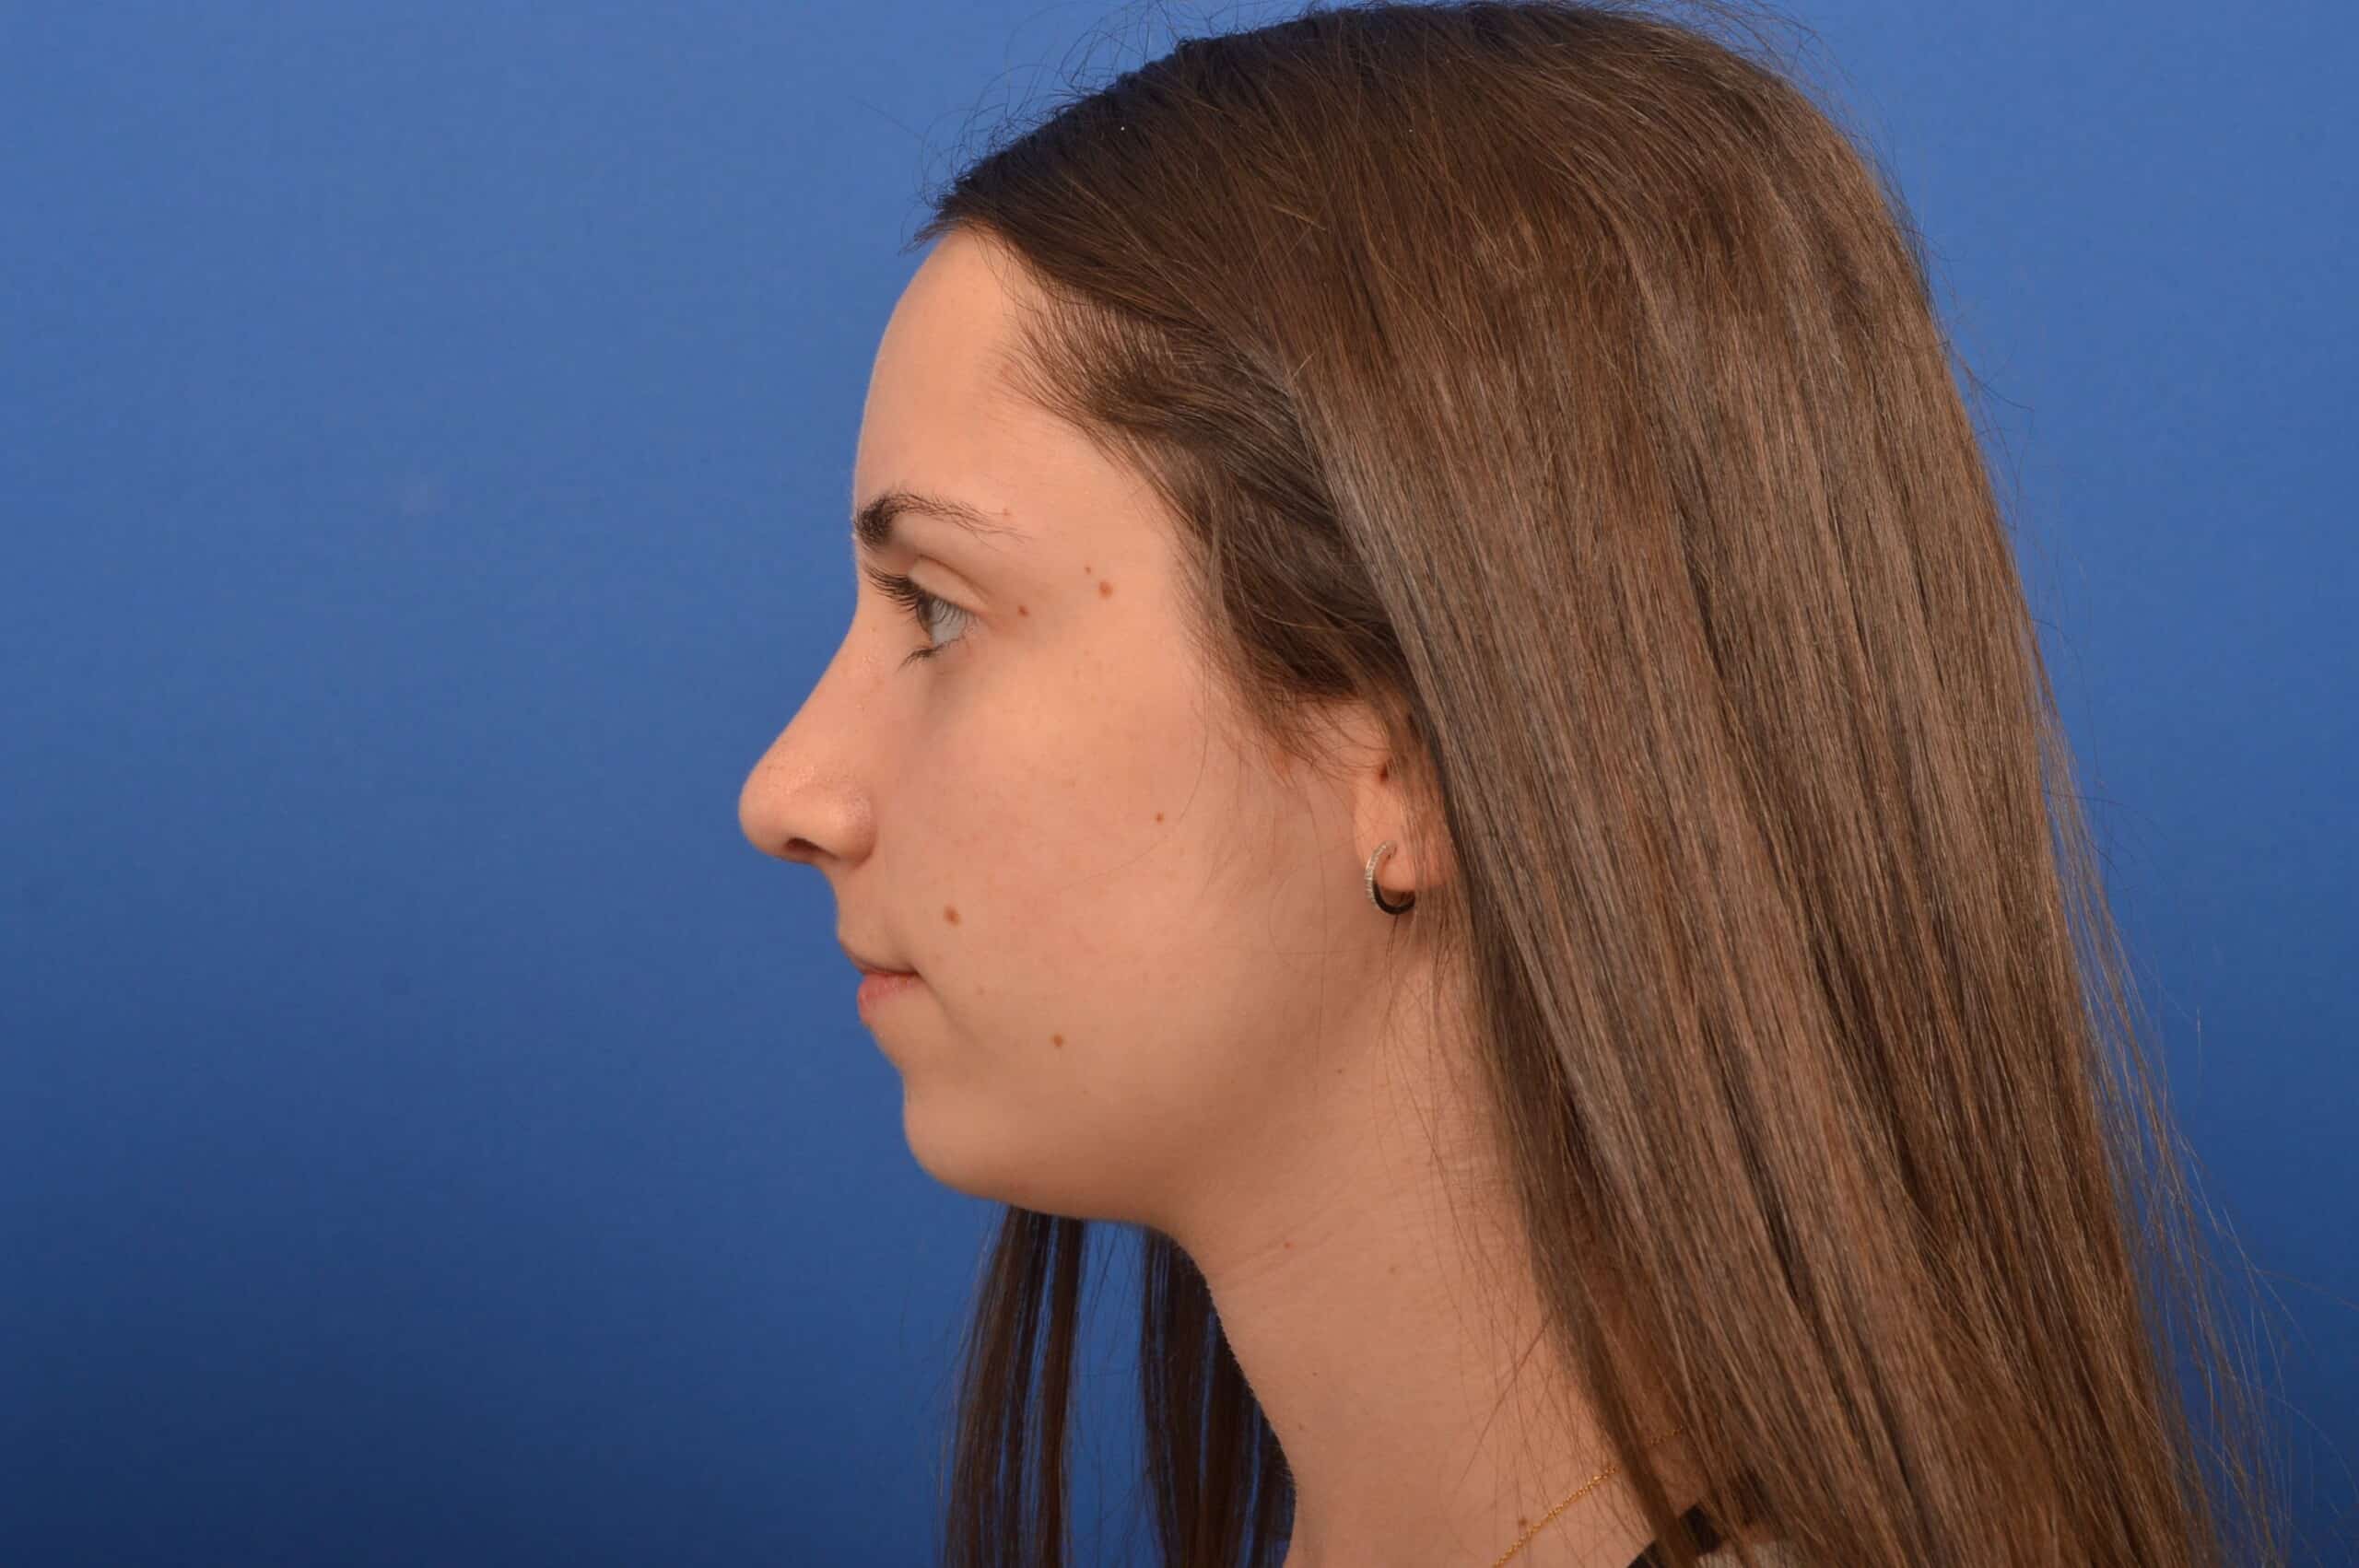 Nose Job Results Before and After